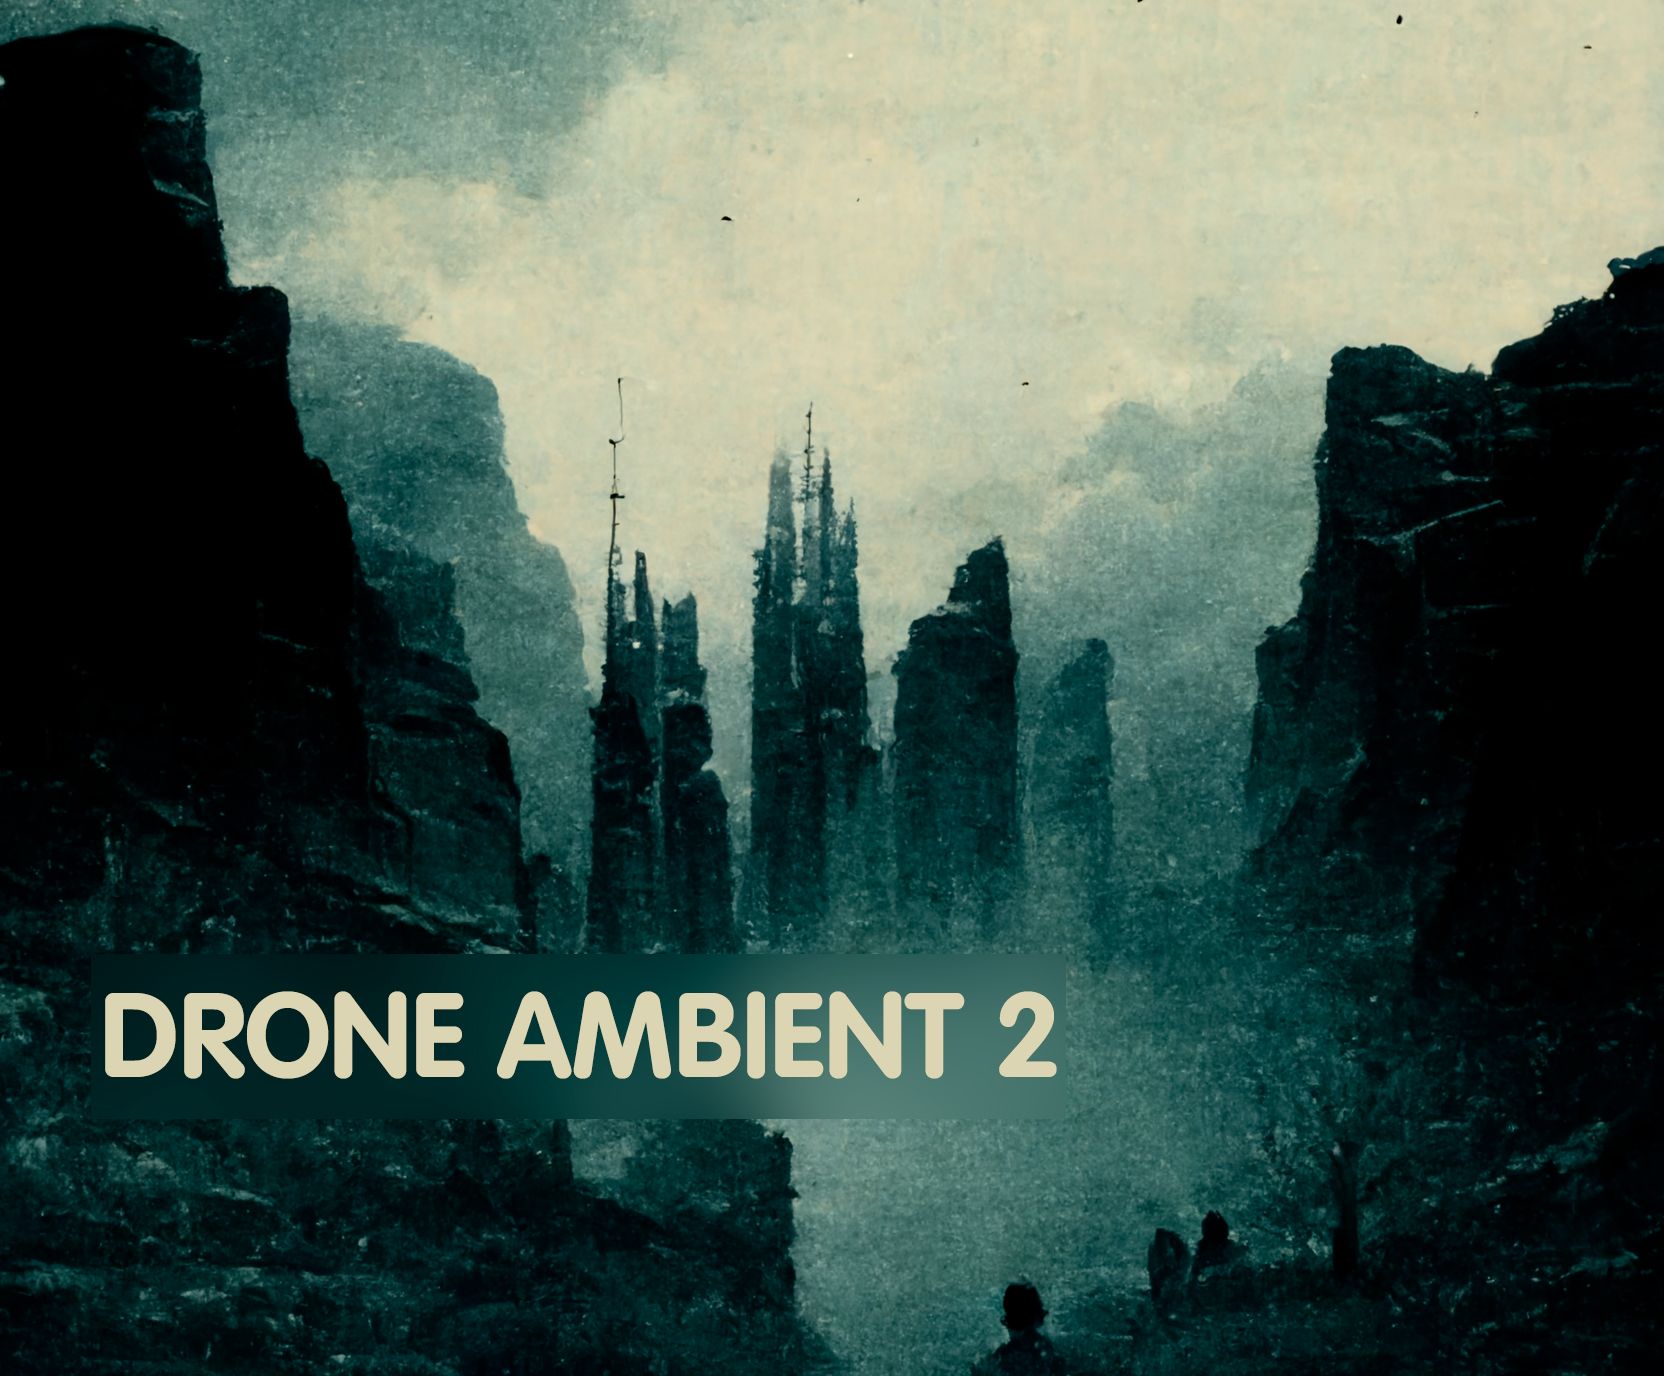 Drone ambient 2